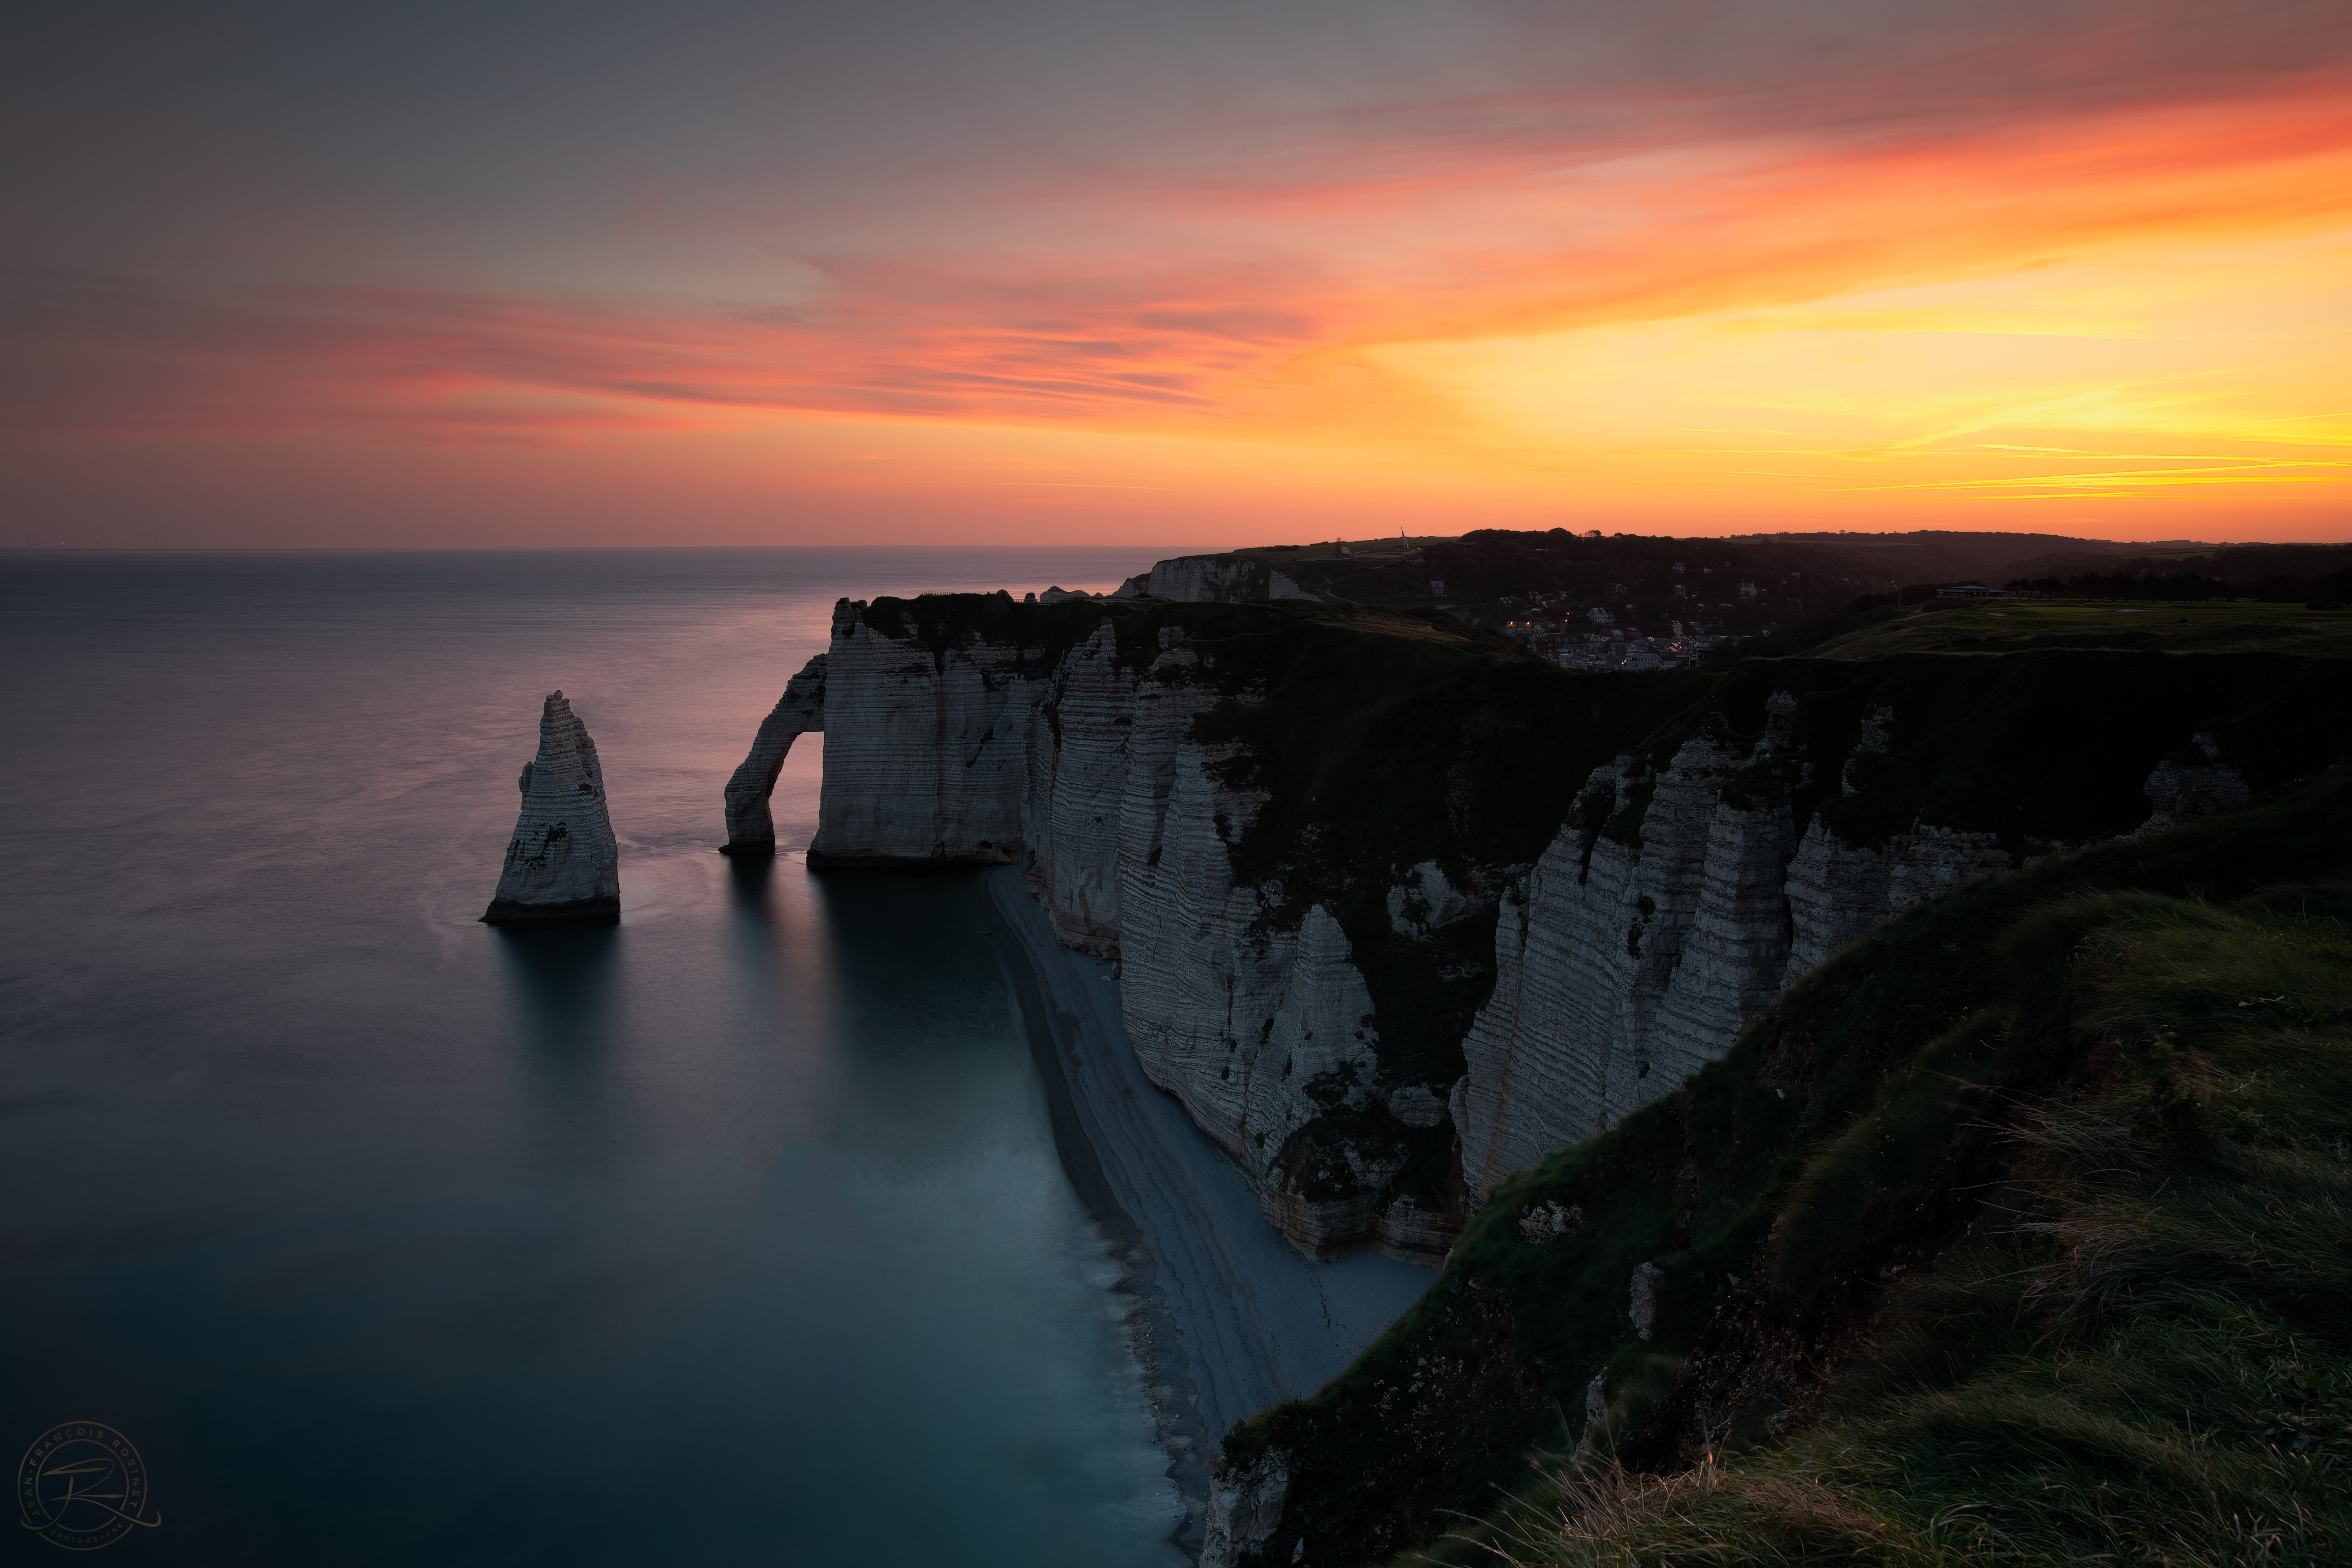 General 6720x4480 sunrise landscape photography watermarked Étretat sea France cliff water sky nature sunlight low light